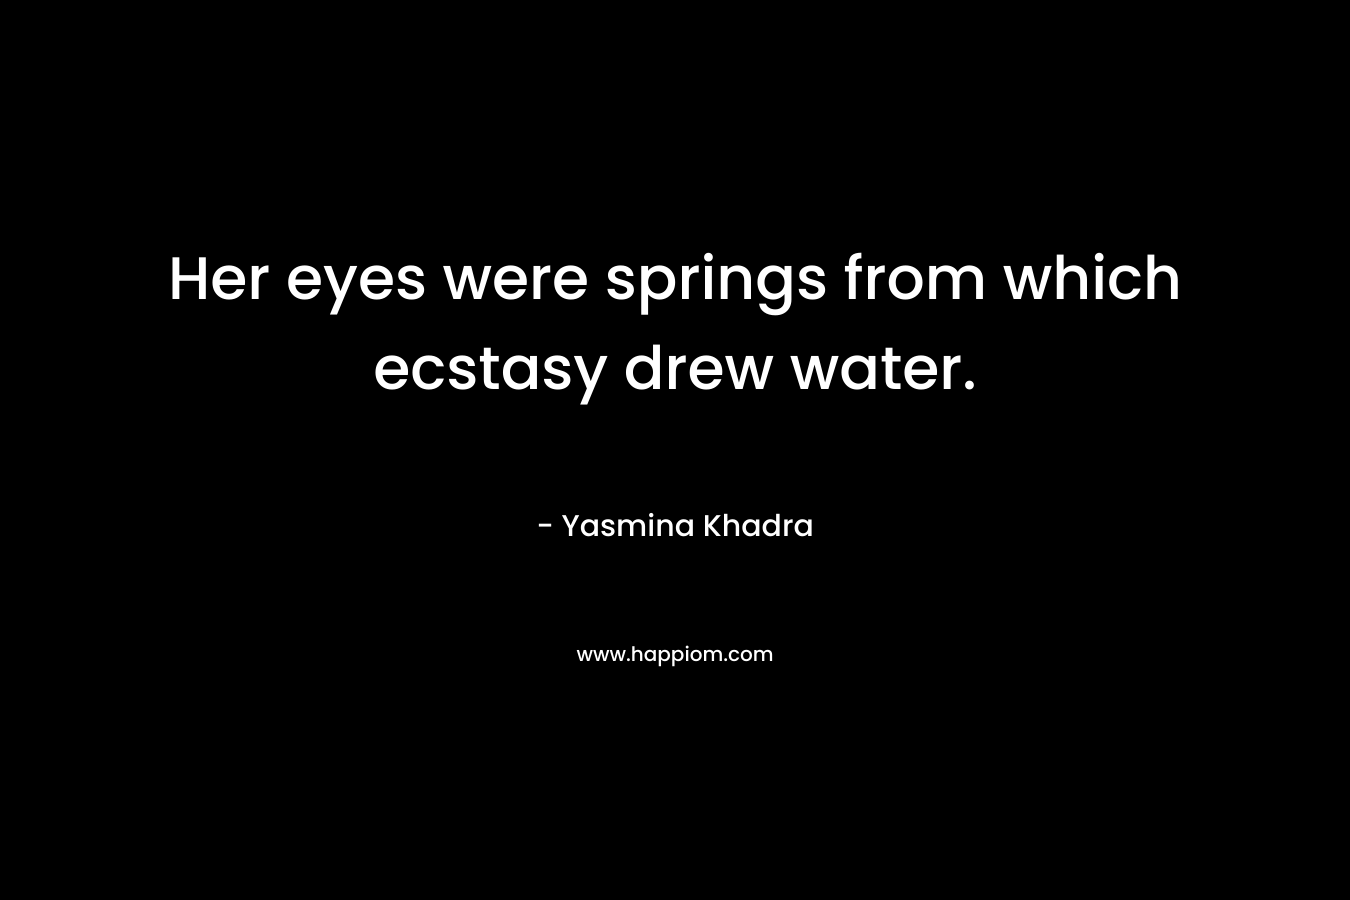 Her eyes were springs from which ecstasy drew water.